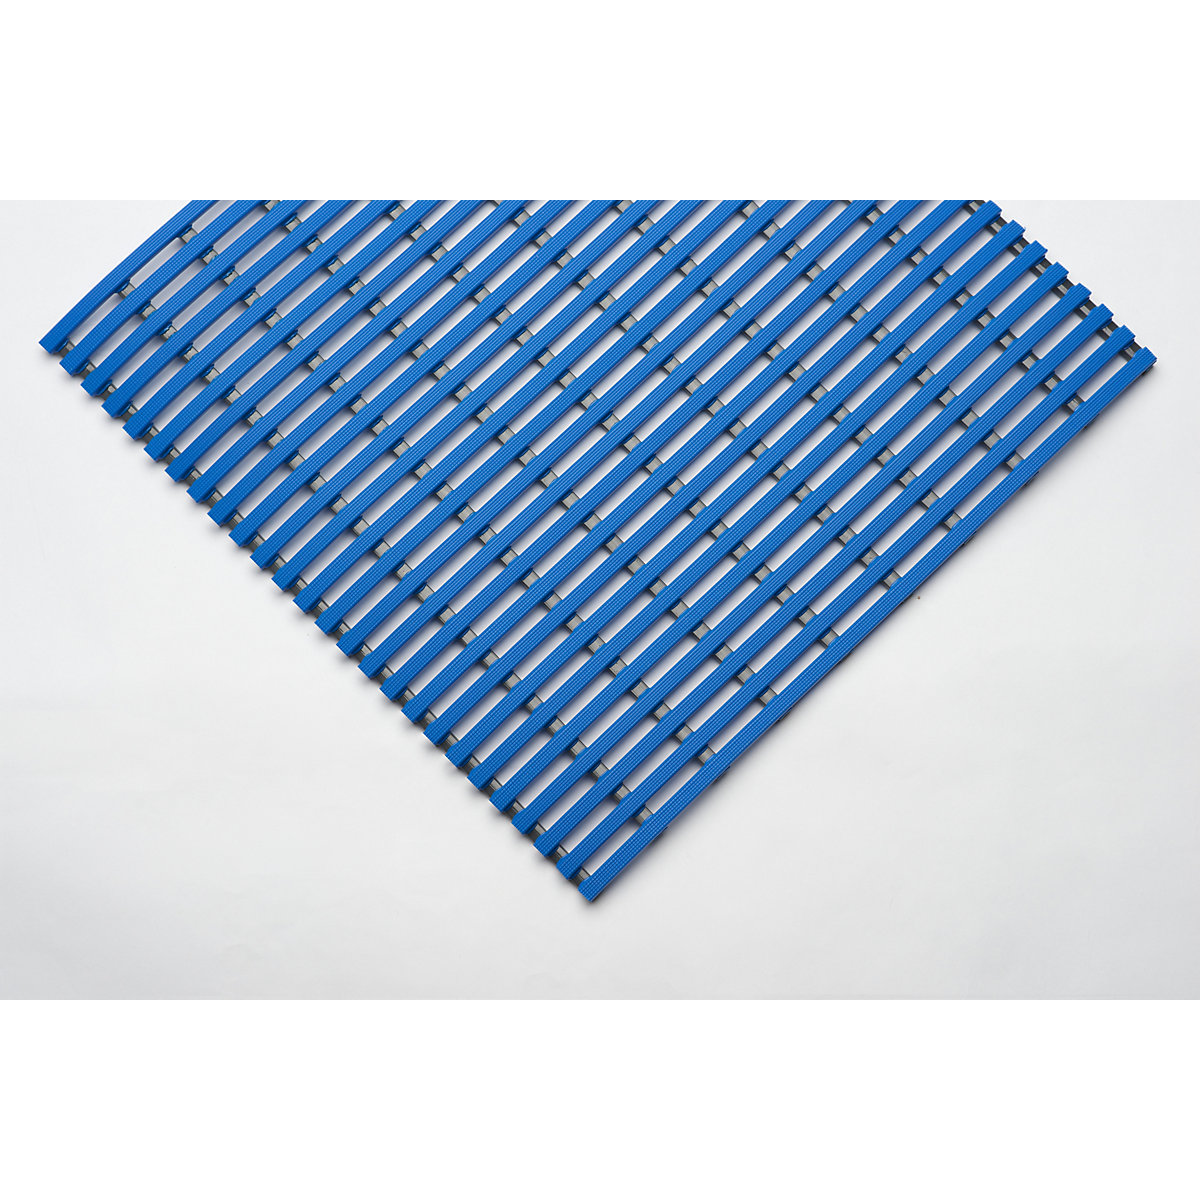 Floor mat for showers and changing rooms (Product illustration 4)-3